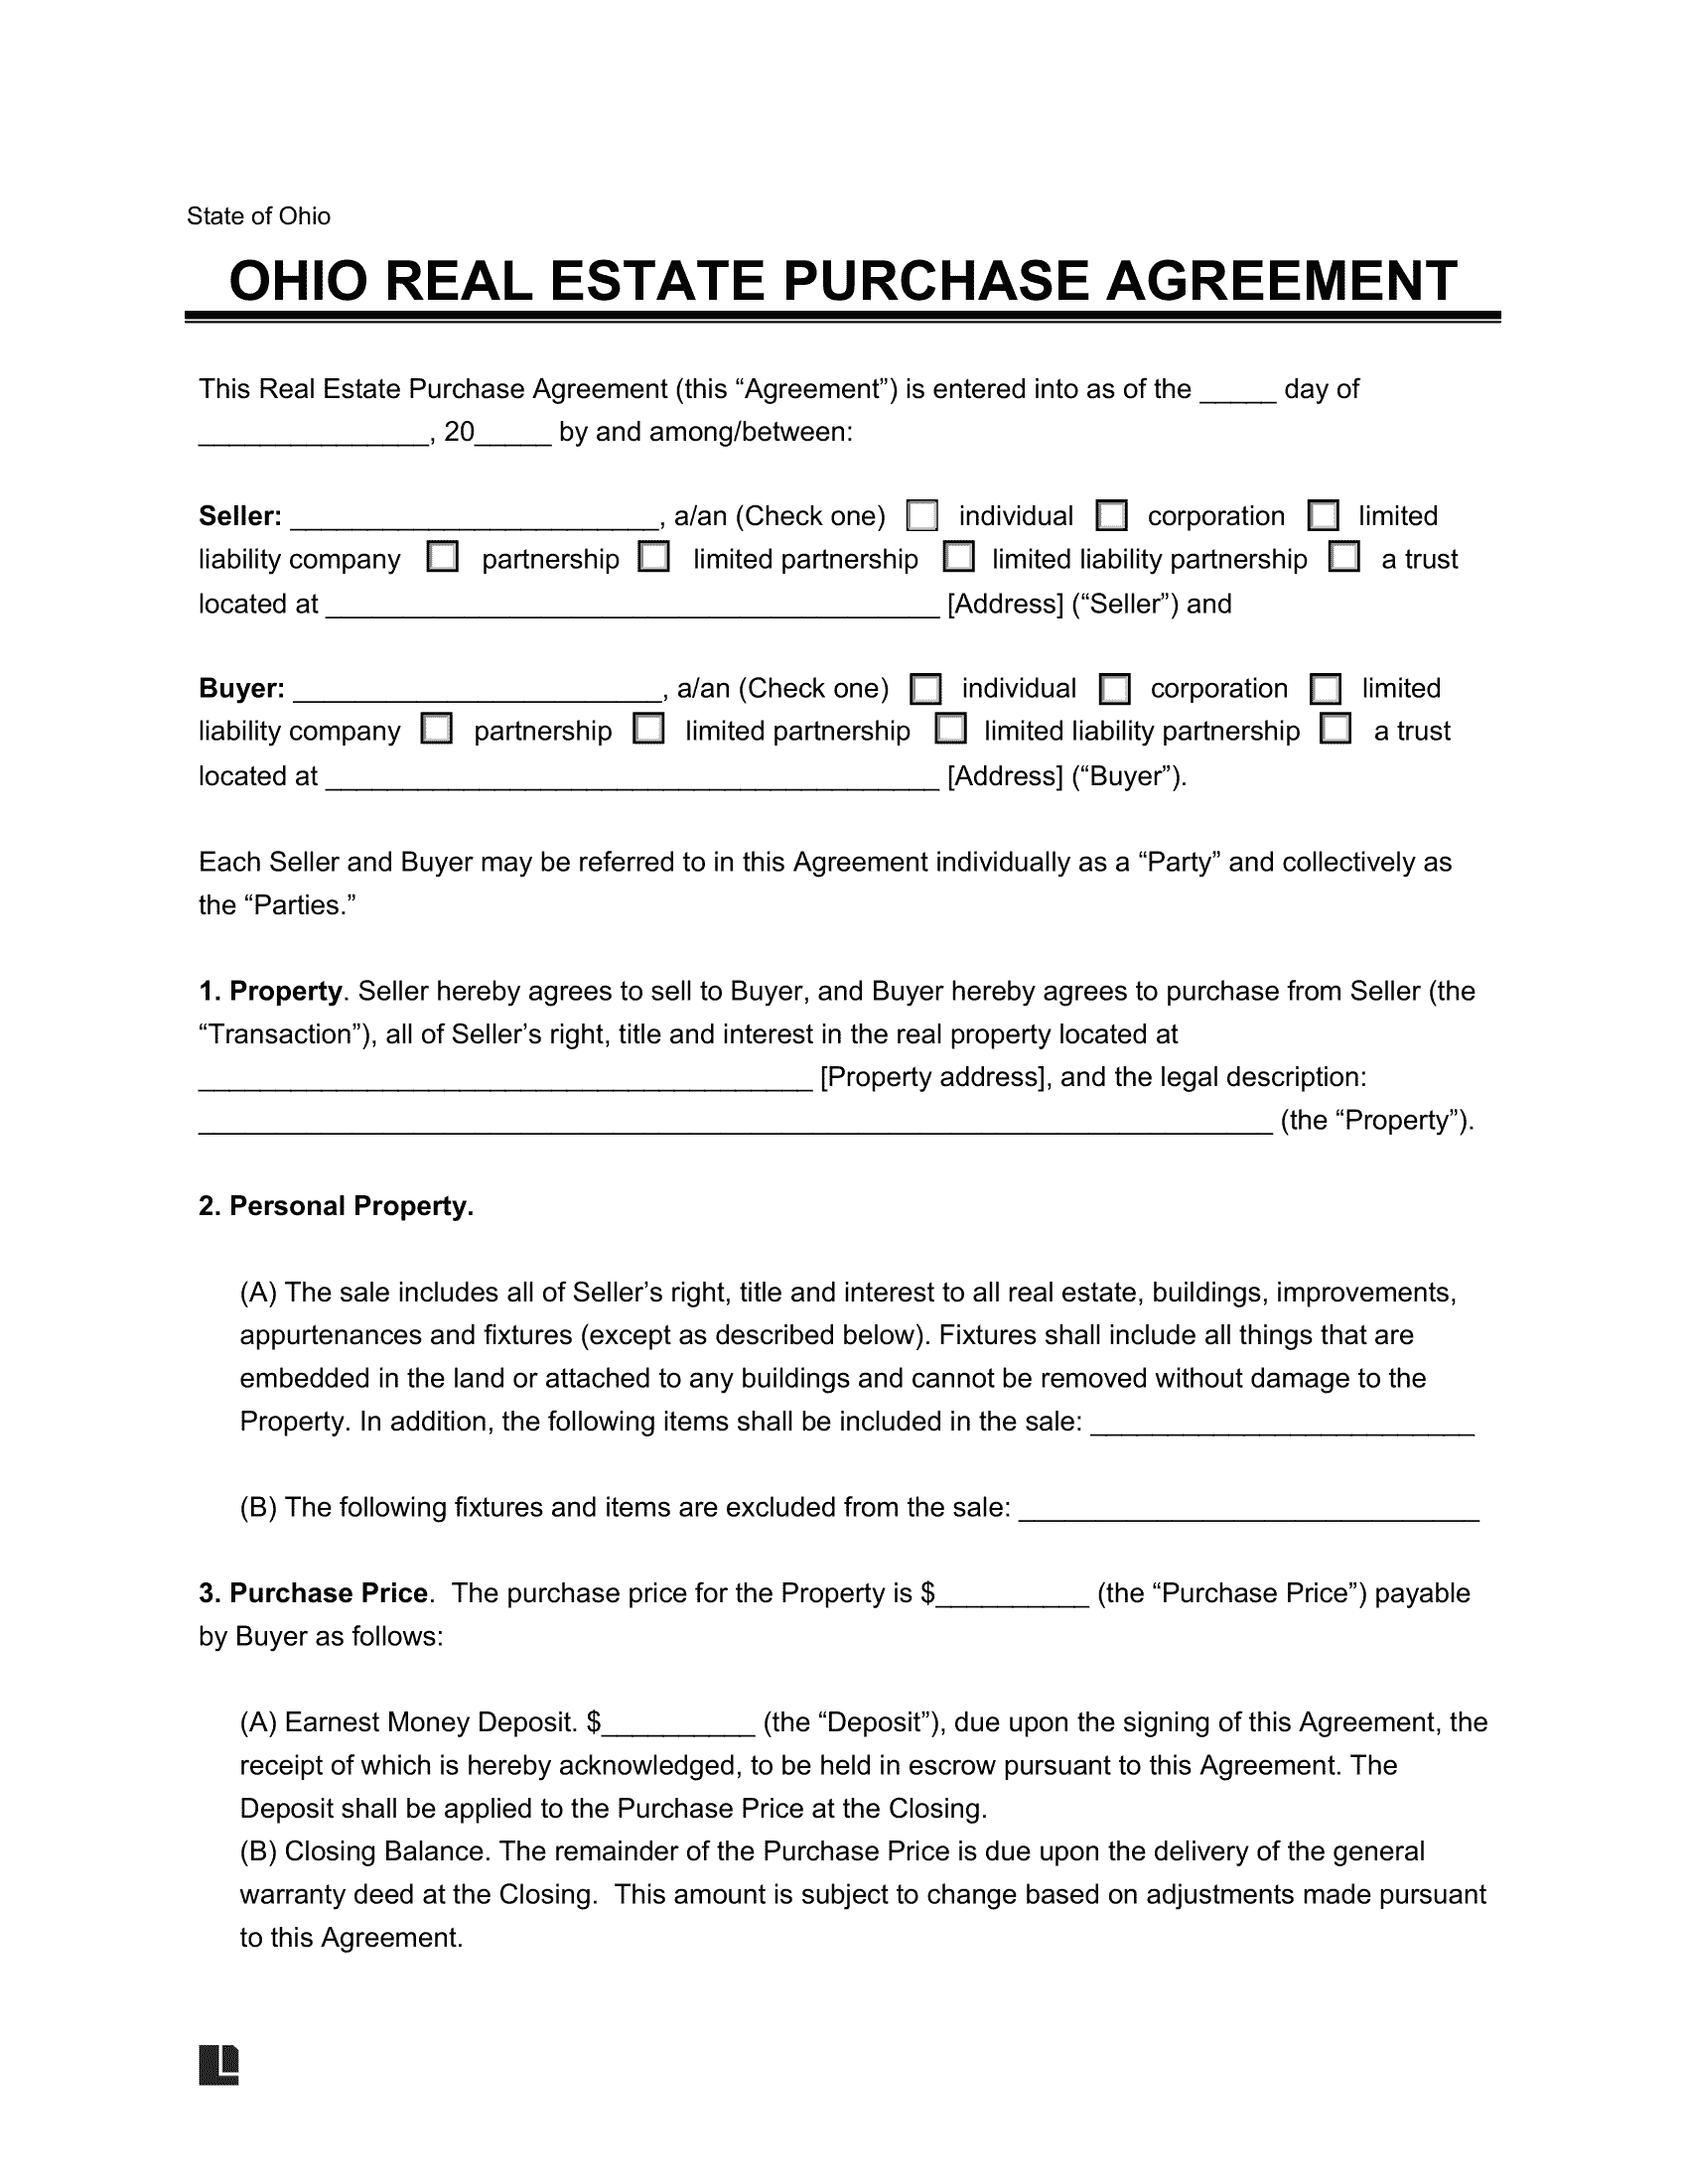 Ohio Residential Purchase Agreement Template